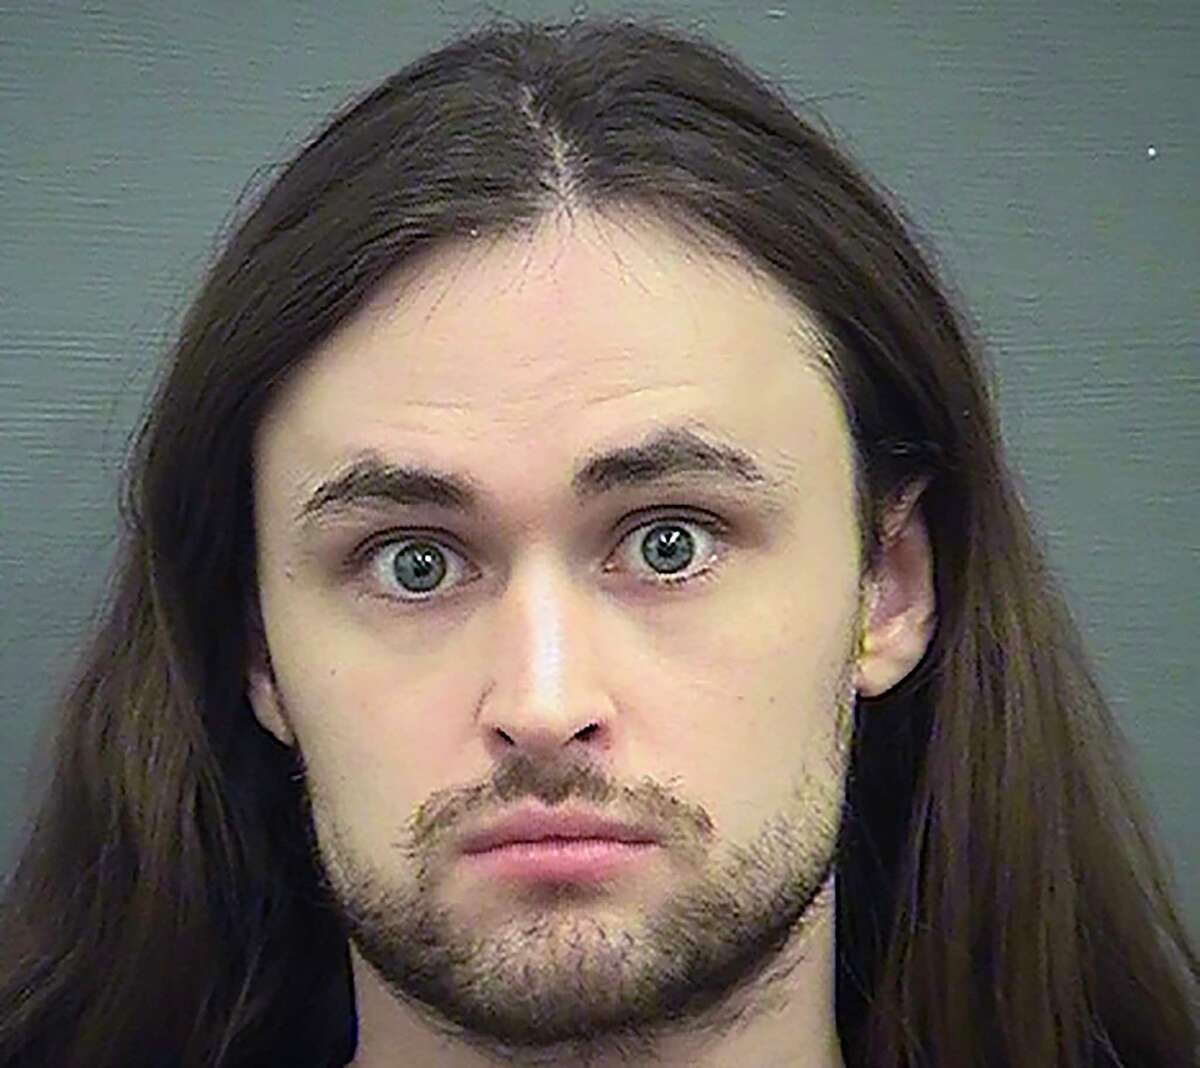 In an undated image provided by the Alexandria Sheriff's Office, John Cameron Denton, 27, of Montgomery, Texas, a former leader of the Atomwaffen Division, a paramilitary neo-Nazi group. Denton was sentenced to three and a half years in prison on Tuesday, May 4, 2021, for his role in a “swatting” scheme whose targets included journalists, a sitting cabinet secretary and a predominantly Black church, federal prosecutors said. A progressive church in Schenectady's Stockade neighborhood was also targeted. (Alexandria Sheriff's Office via The New York Times) -- FOR EDITORIAL USE ONLY. --